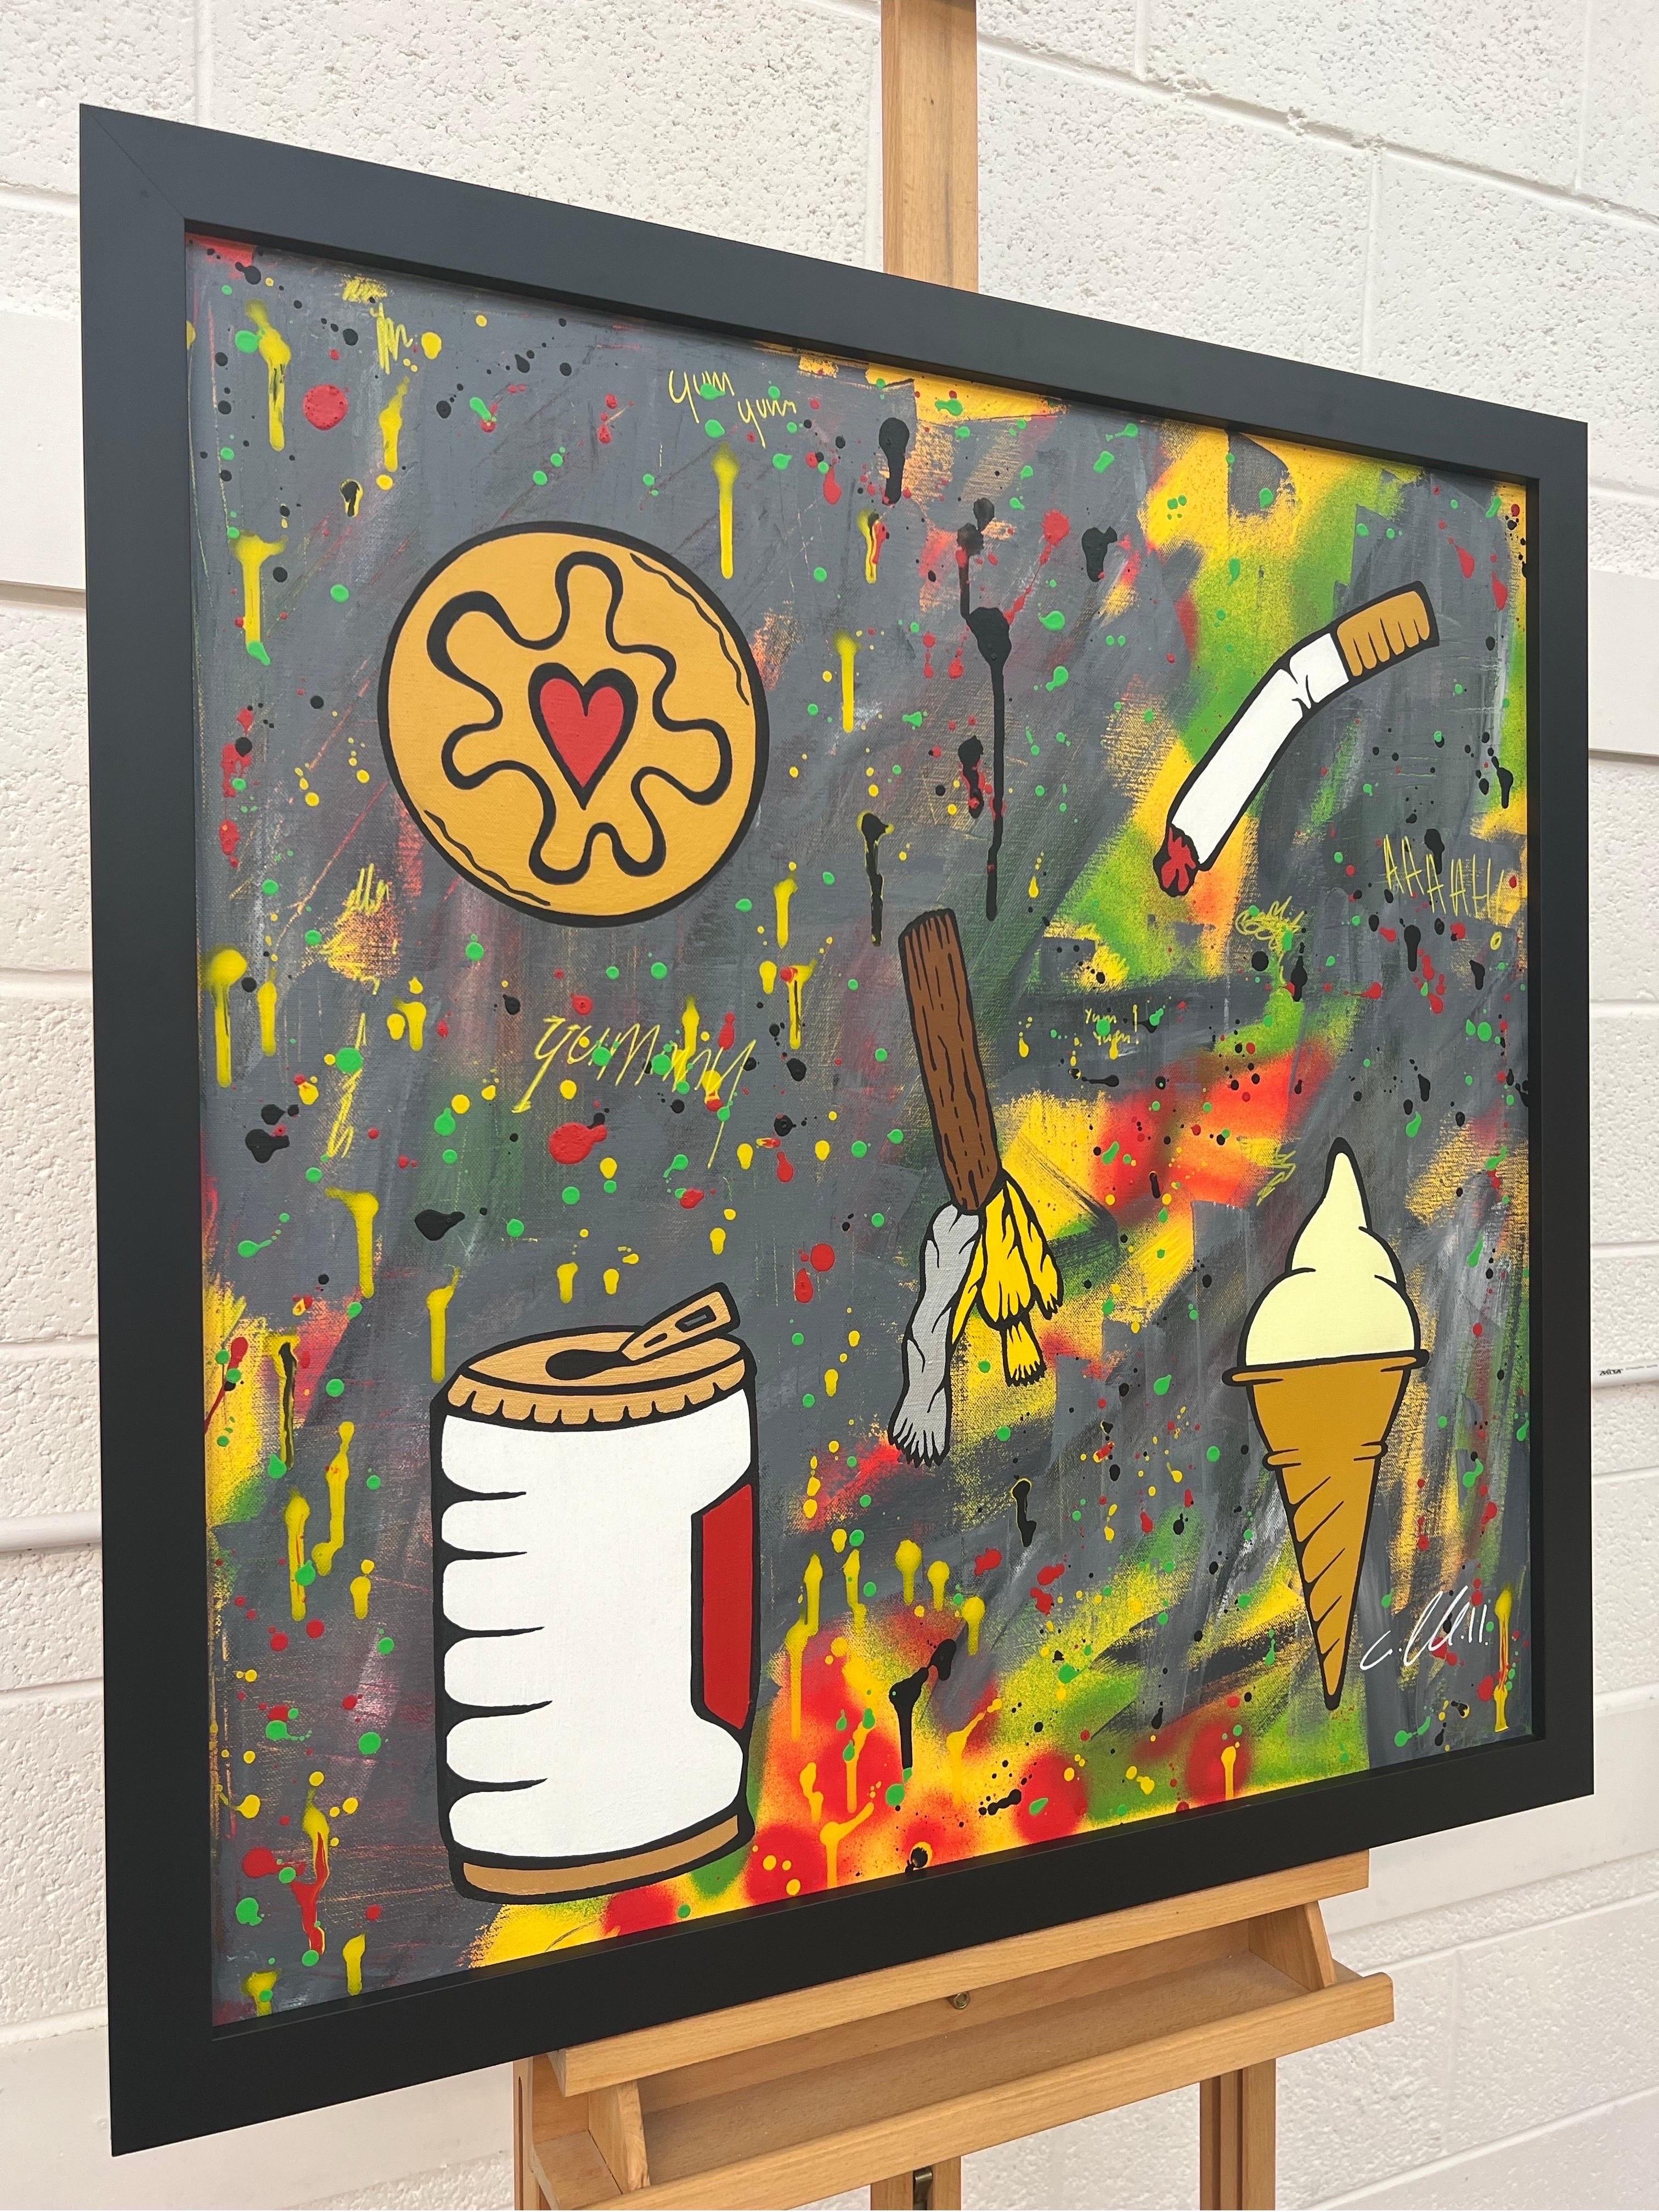 Yummy Sweets & Treats Pop Art on Abstract Background by British Graffiti Artist - Painting by Chris Pegg